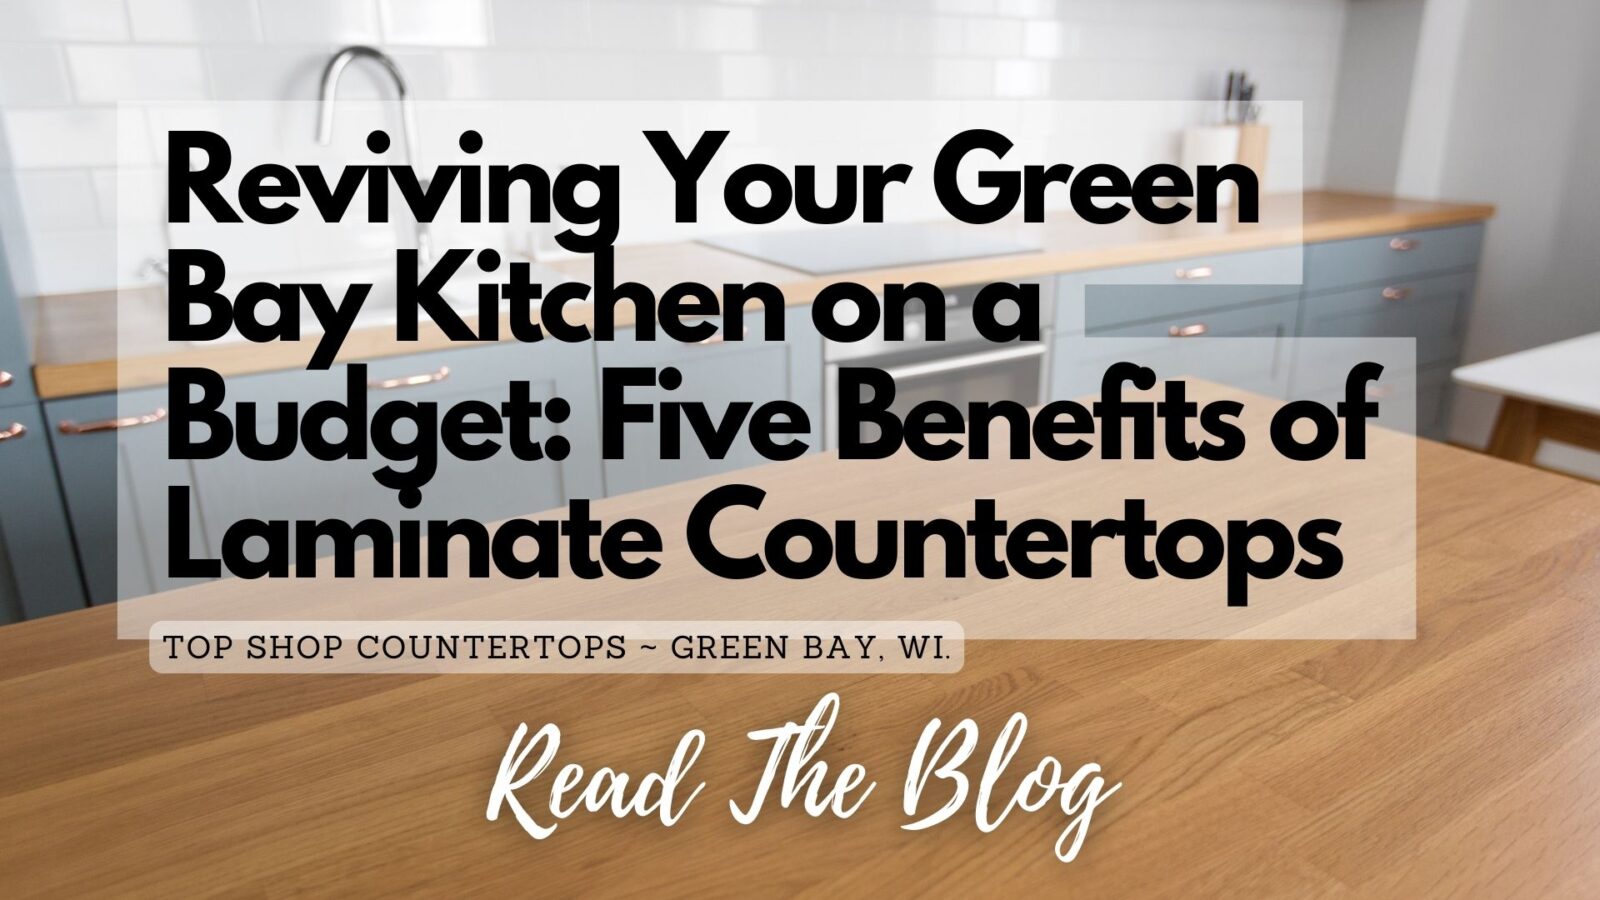 5 benefits of a laminate countertop from Top Shop